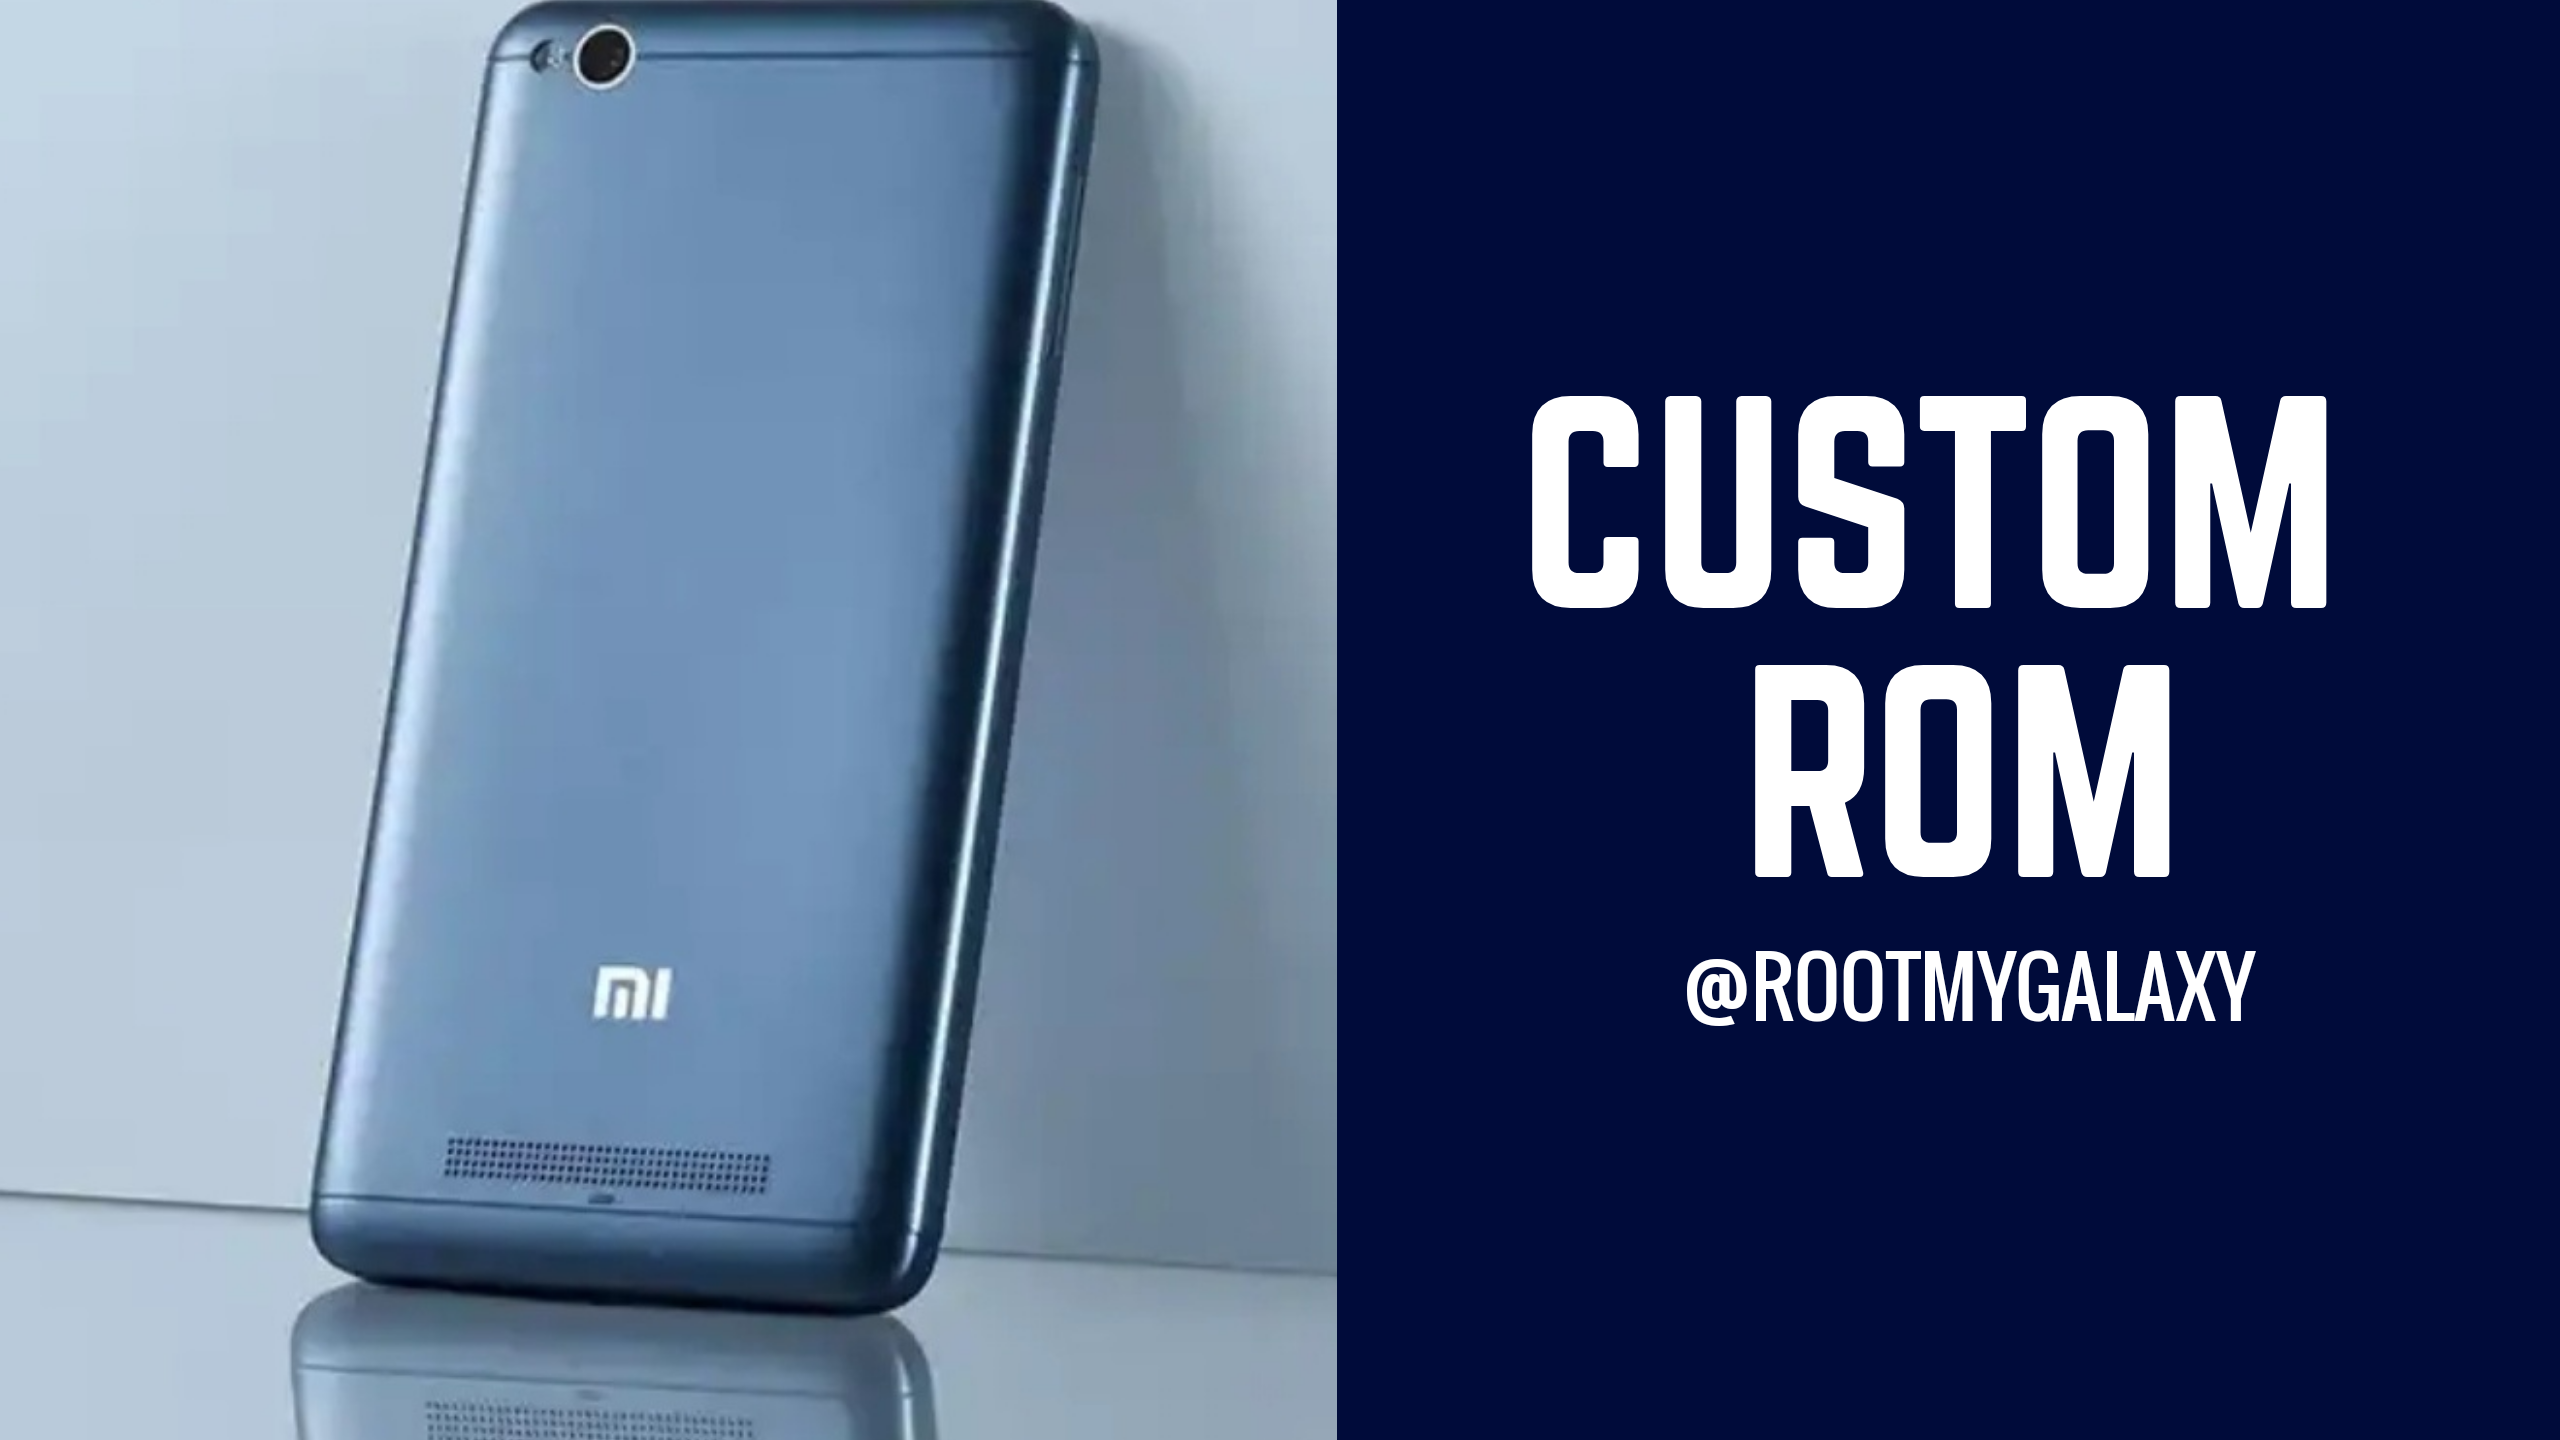 Download and Install dotOS Oreo ROM On Xiaomi Redmi 4A (Android 8.1)